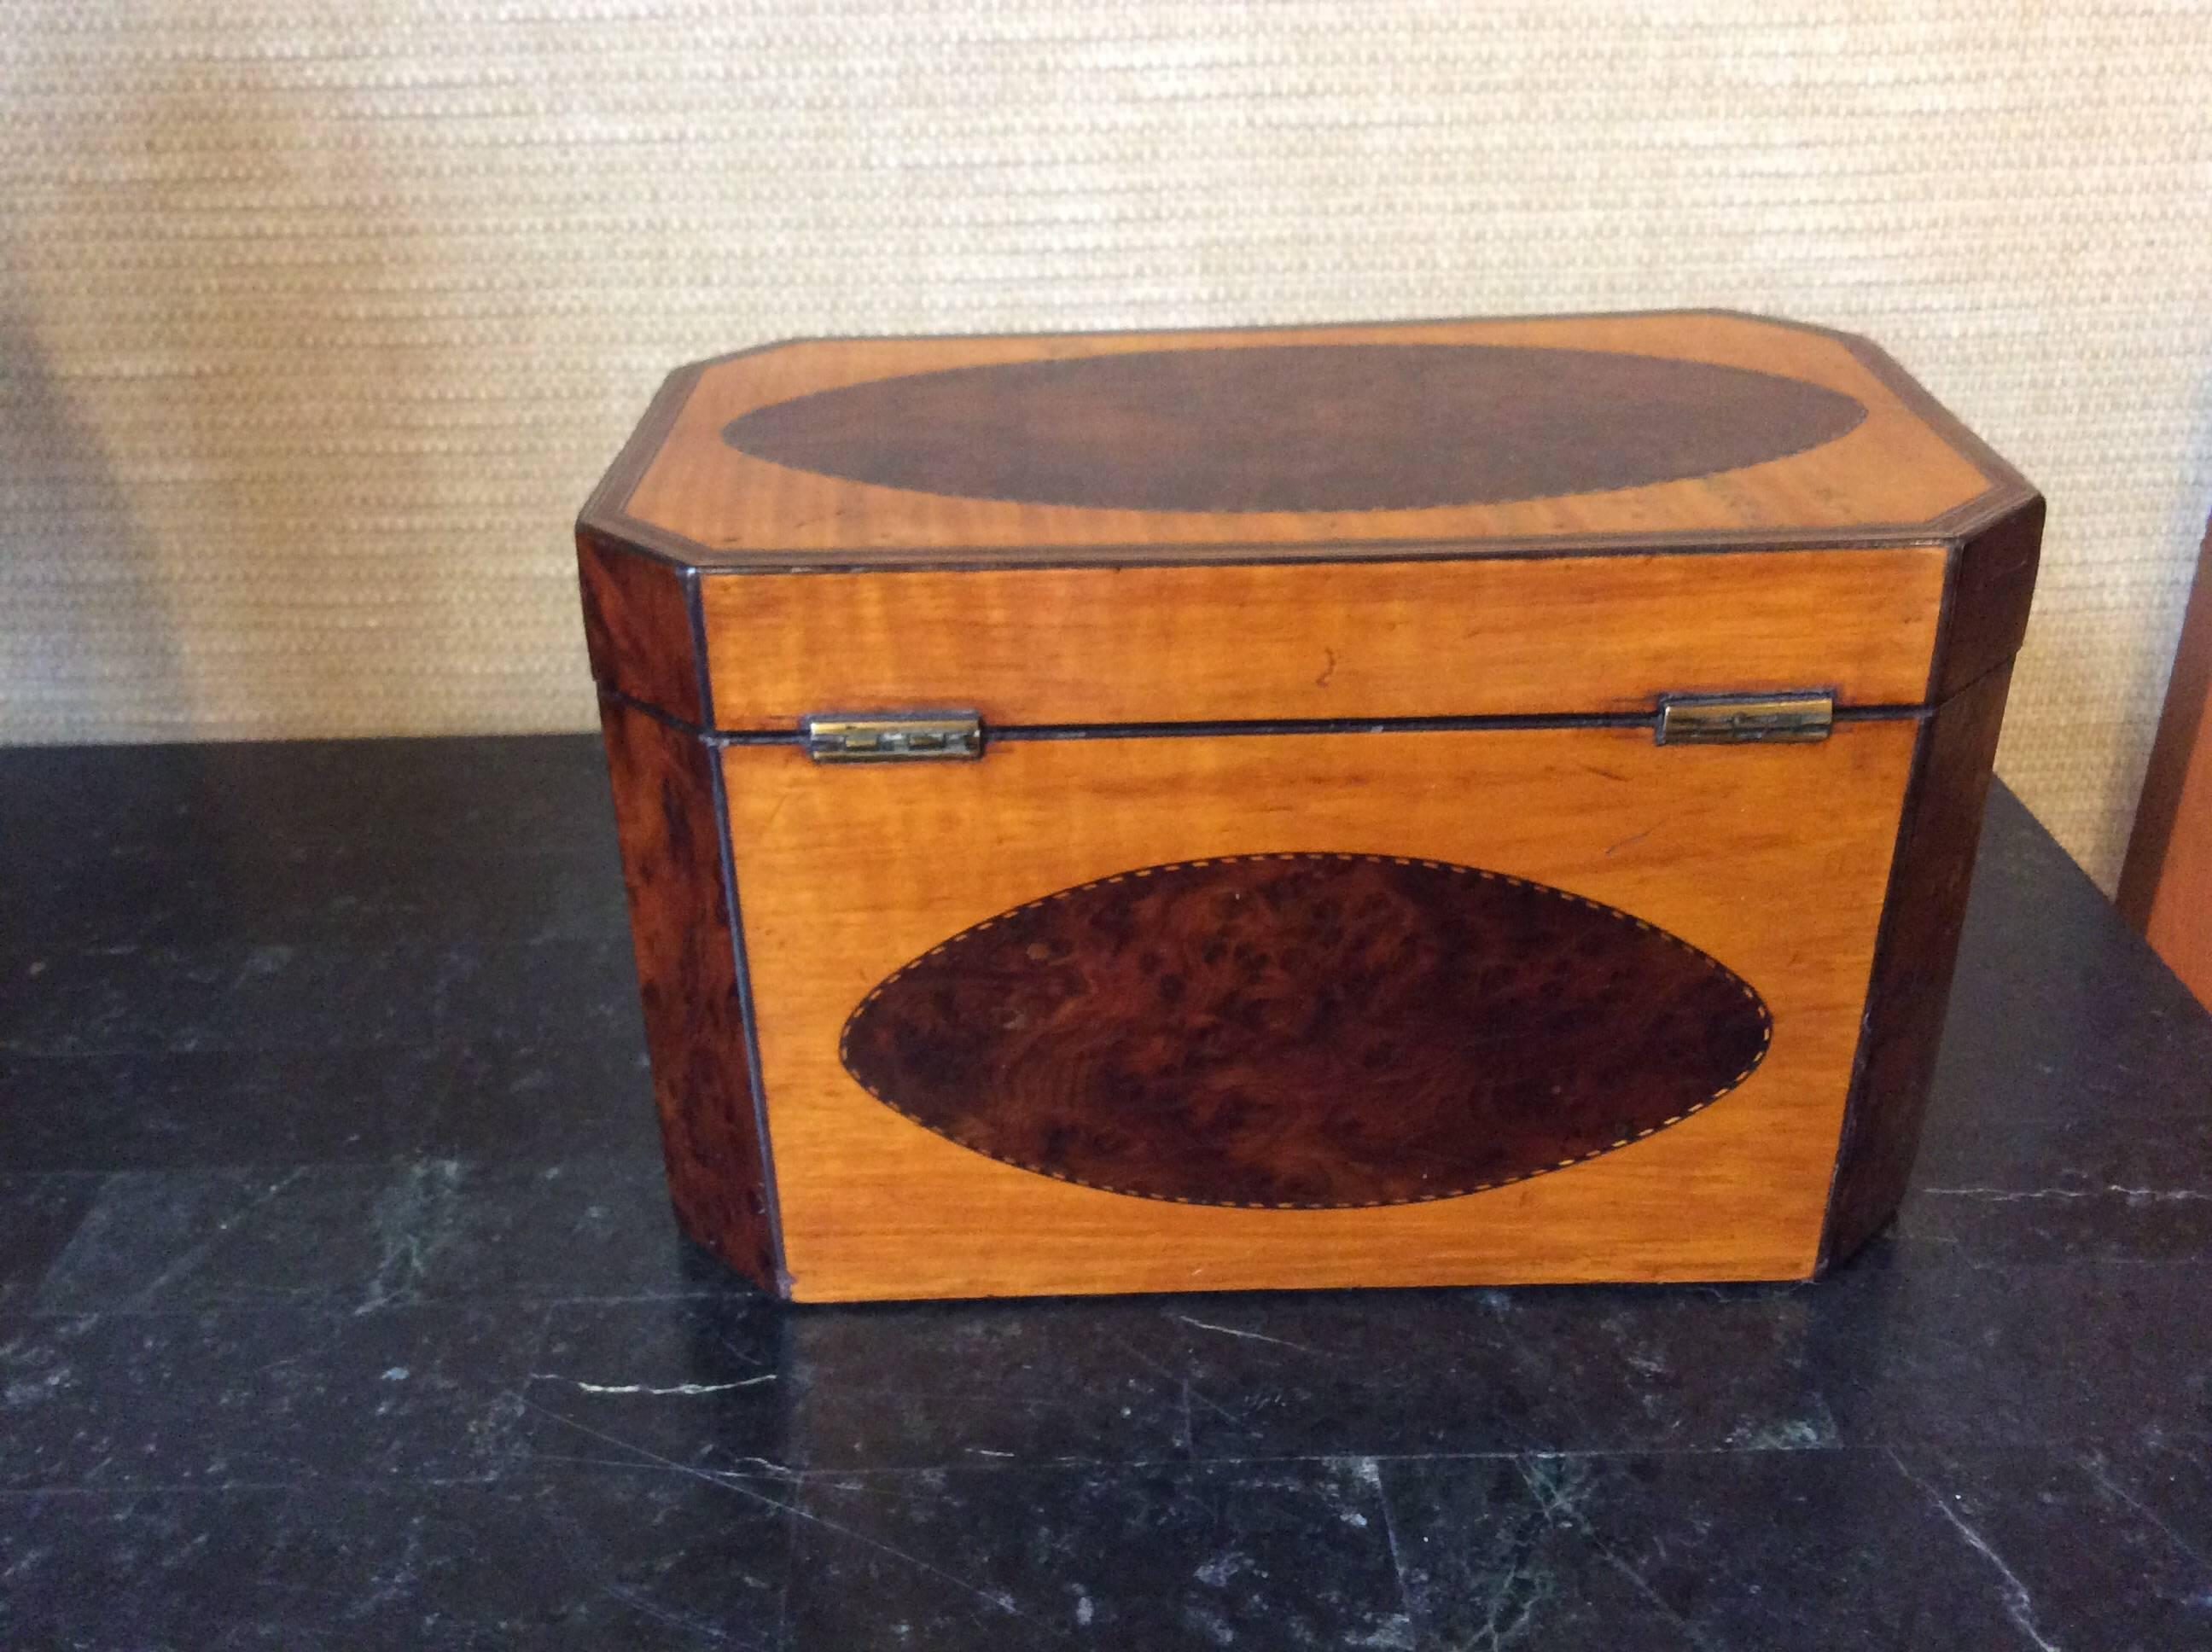 Octagon Shaped 19th Century Tea Caddy In Good Condition For Sale In Highland Park, IL